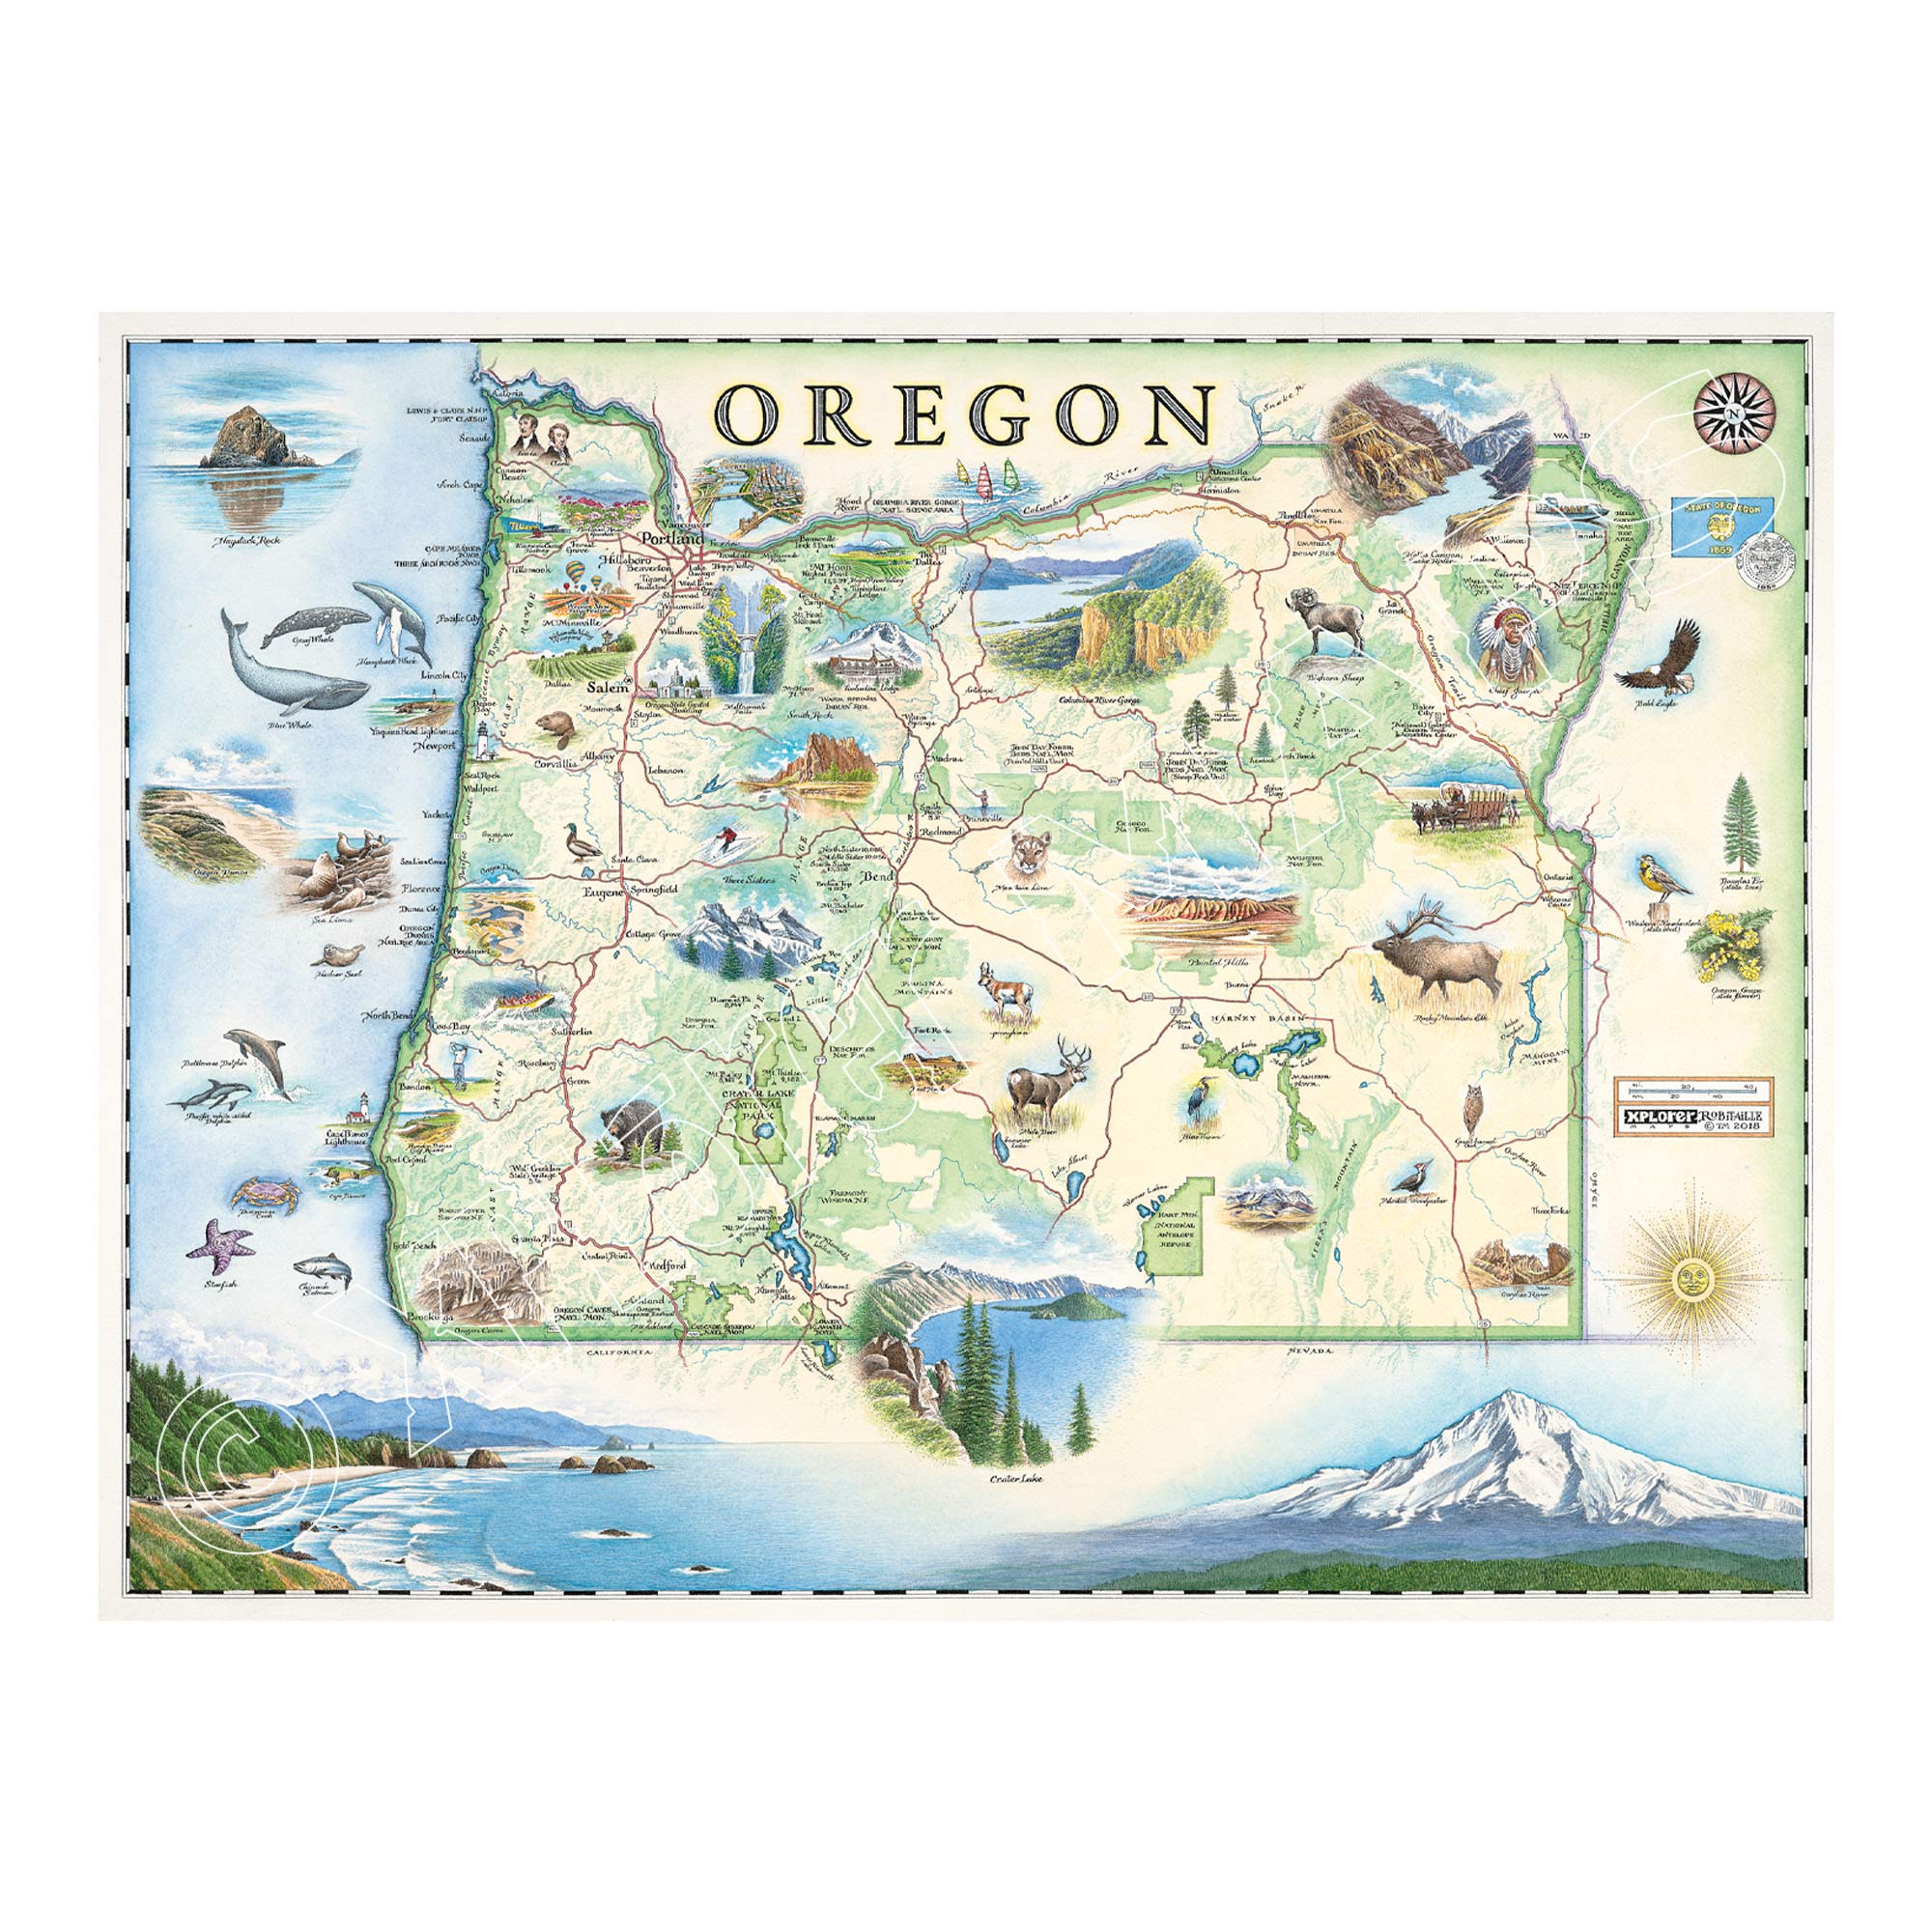 Oregon state hand-drawn map in earth tones green and blue. The map features illustrations such as Hells Canyon Snake River, the Columbia River Gorge, Multnomah Falls, and Crater lake. Flora and fauna include blue whale, big horn sheep, Dungeness crab, Oregon grape, and Douglas Fir. Measures 24x18.